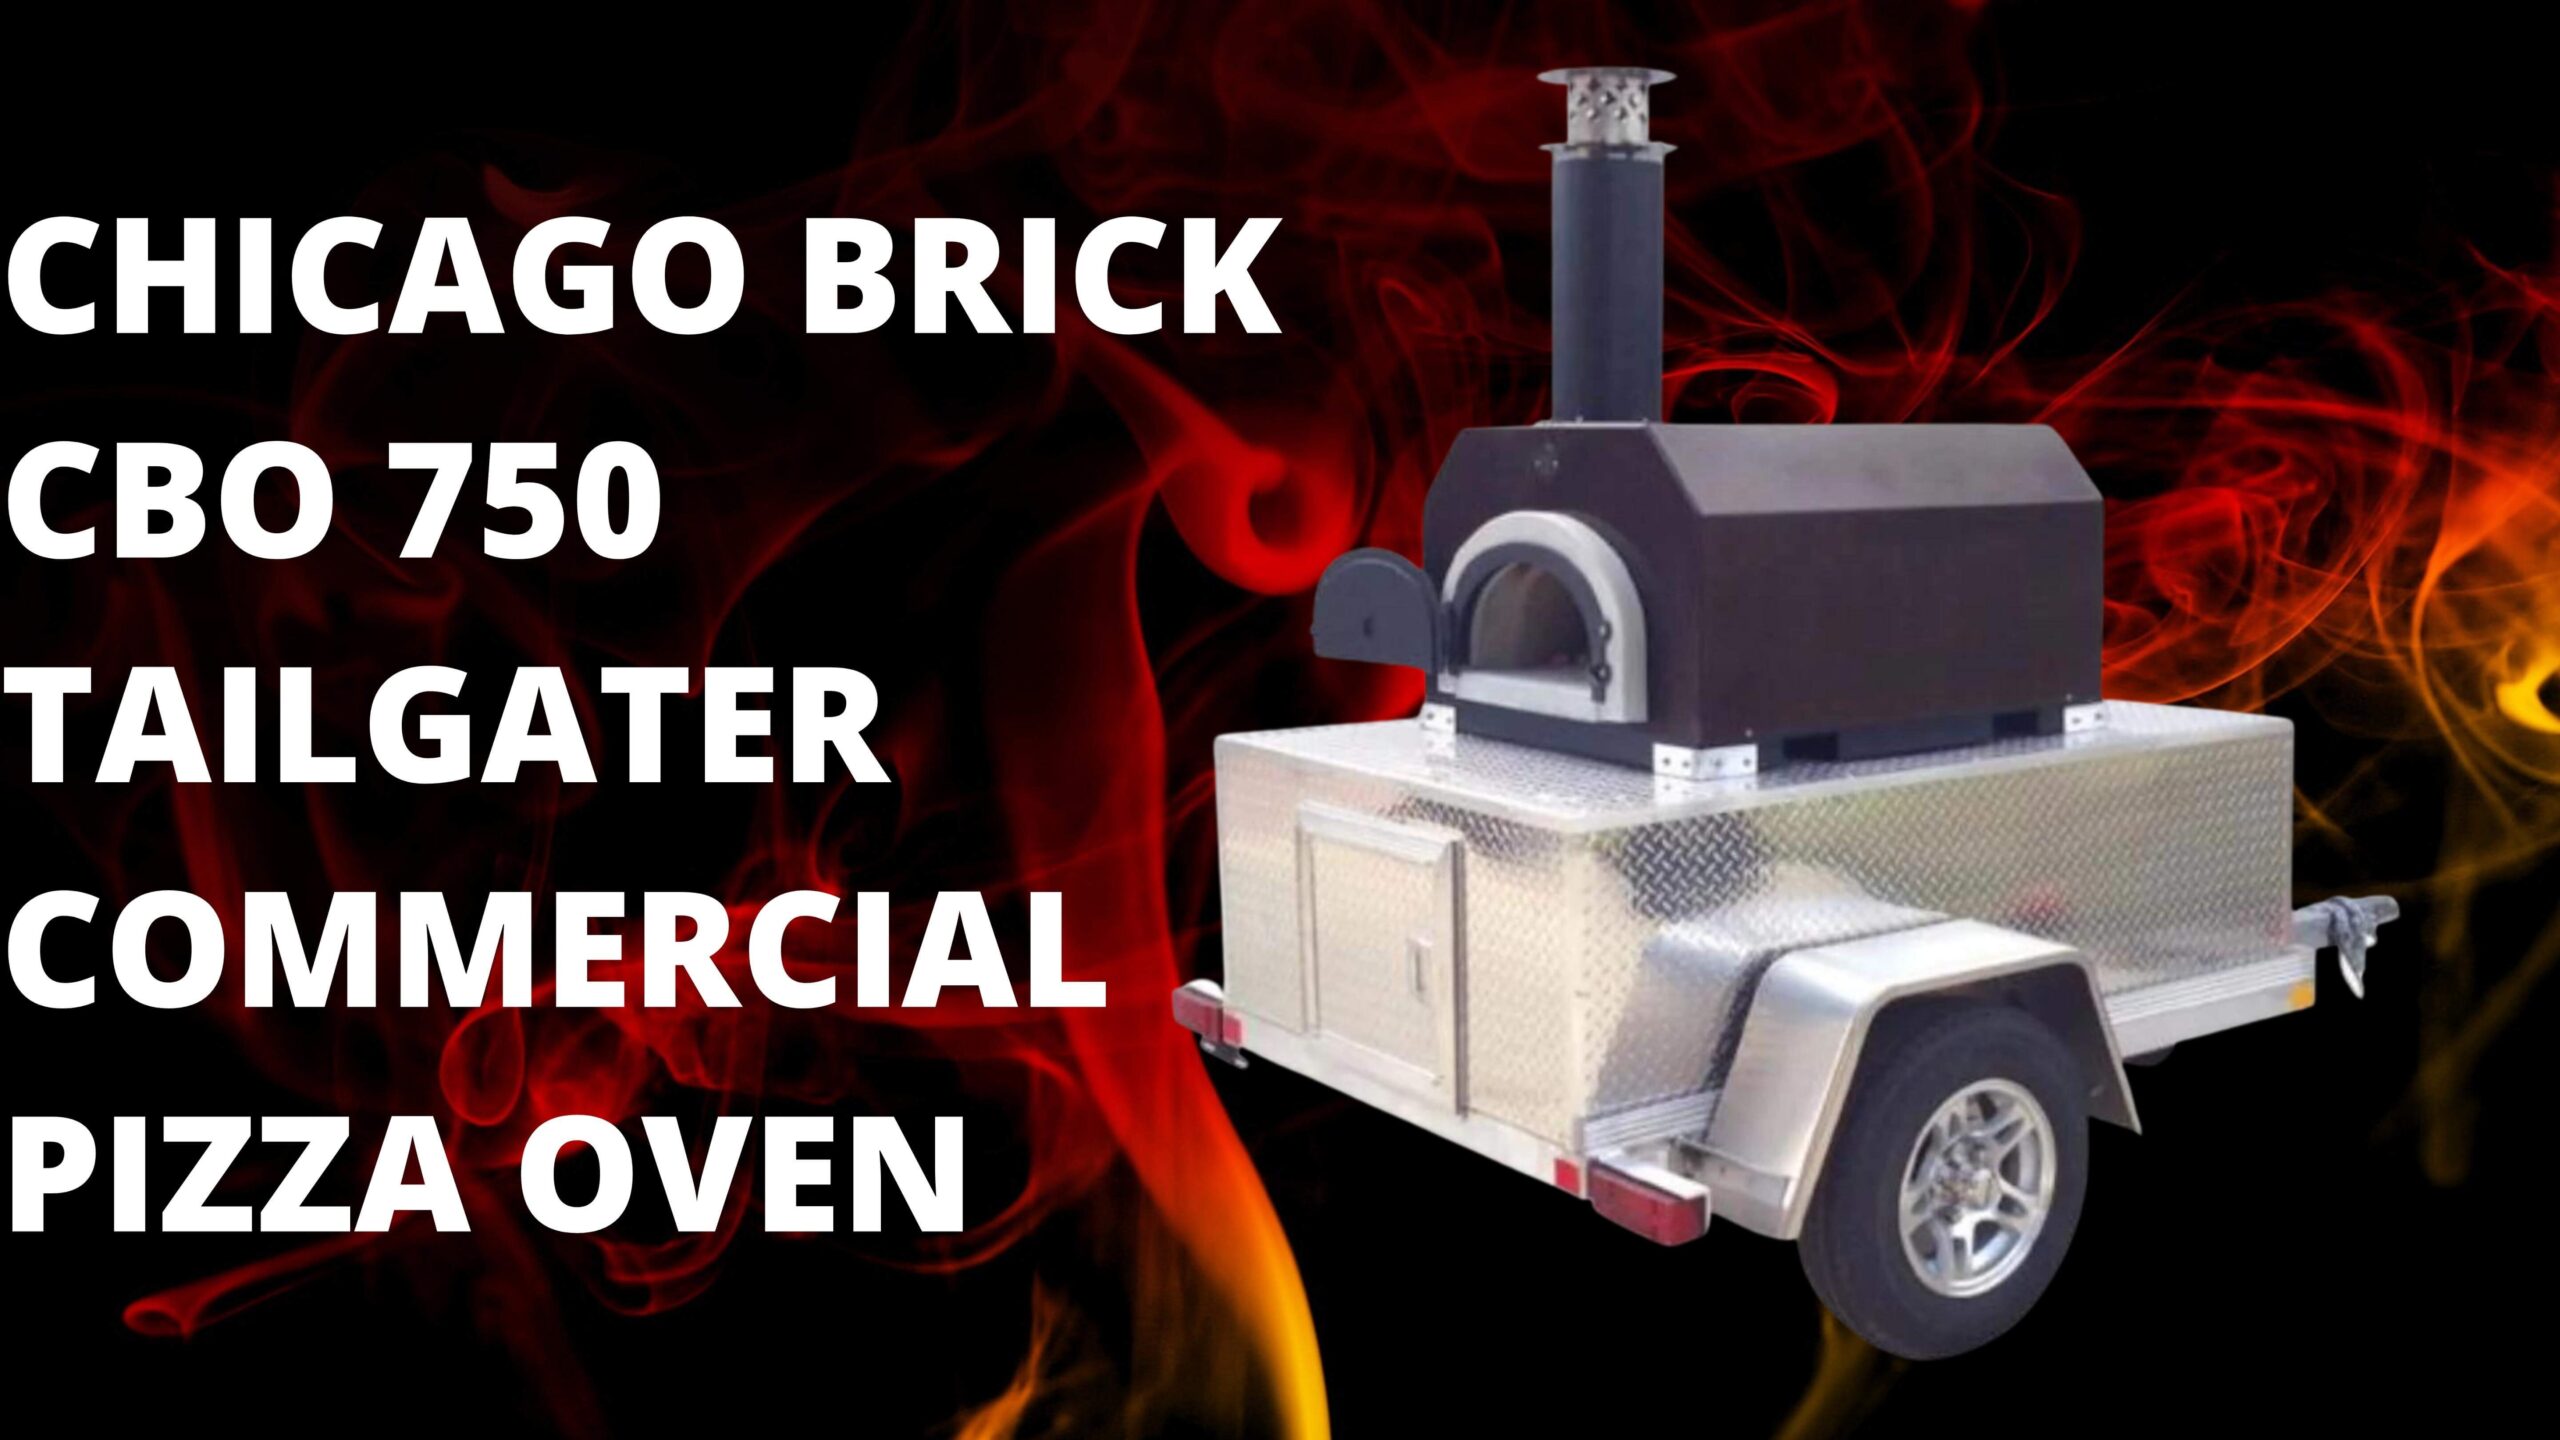 chicago brick oven cbo 750 tailgater commercial pizza oven with flames in background